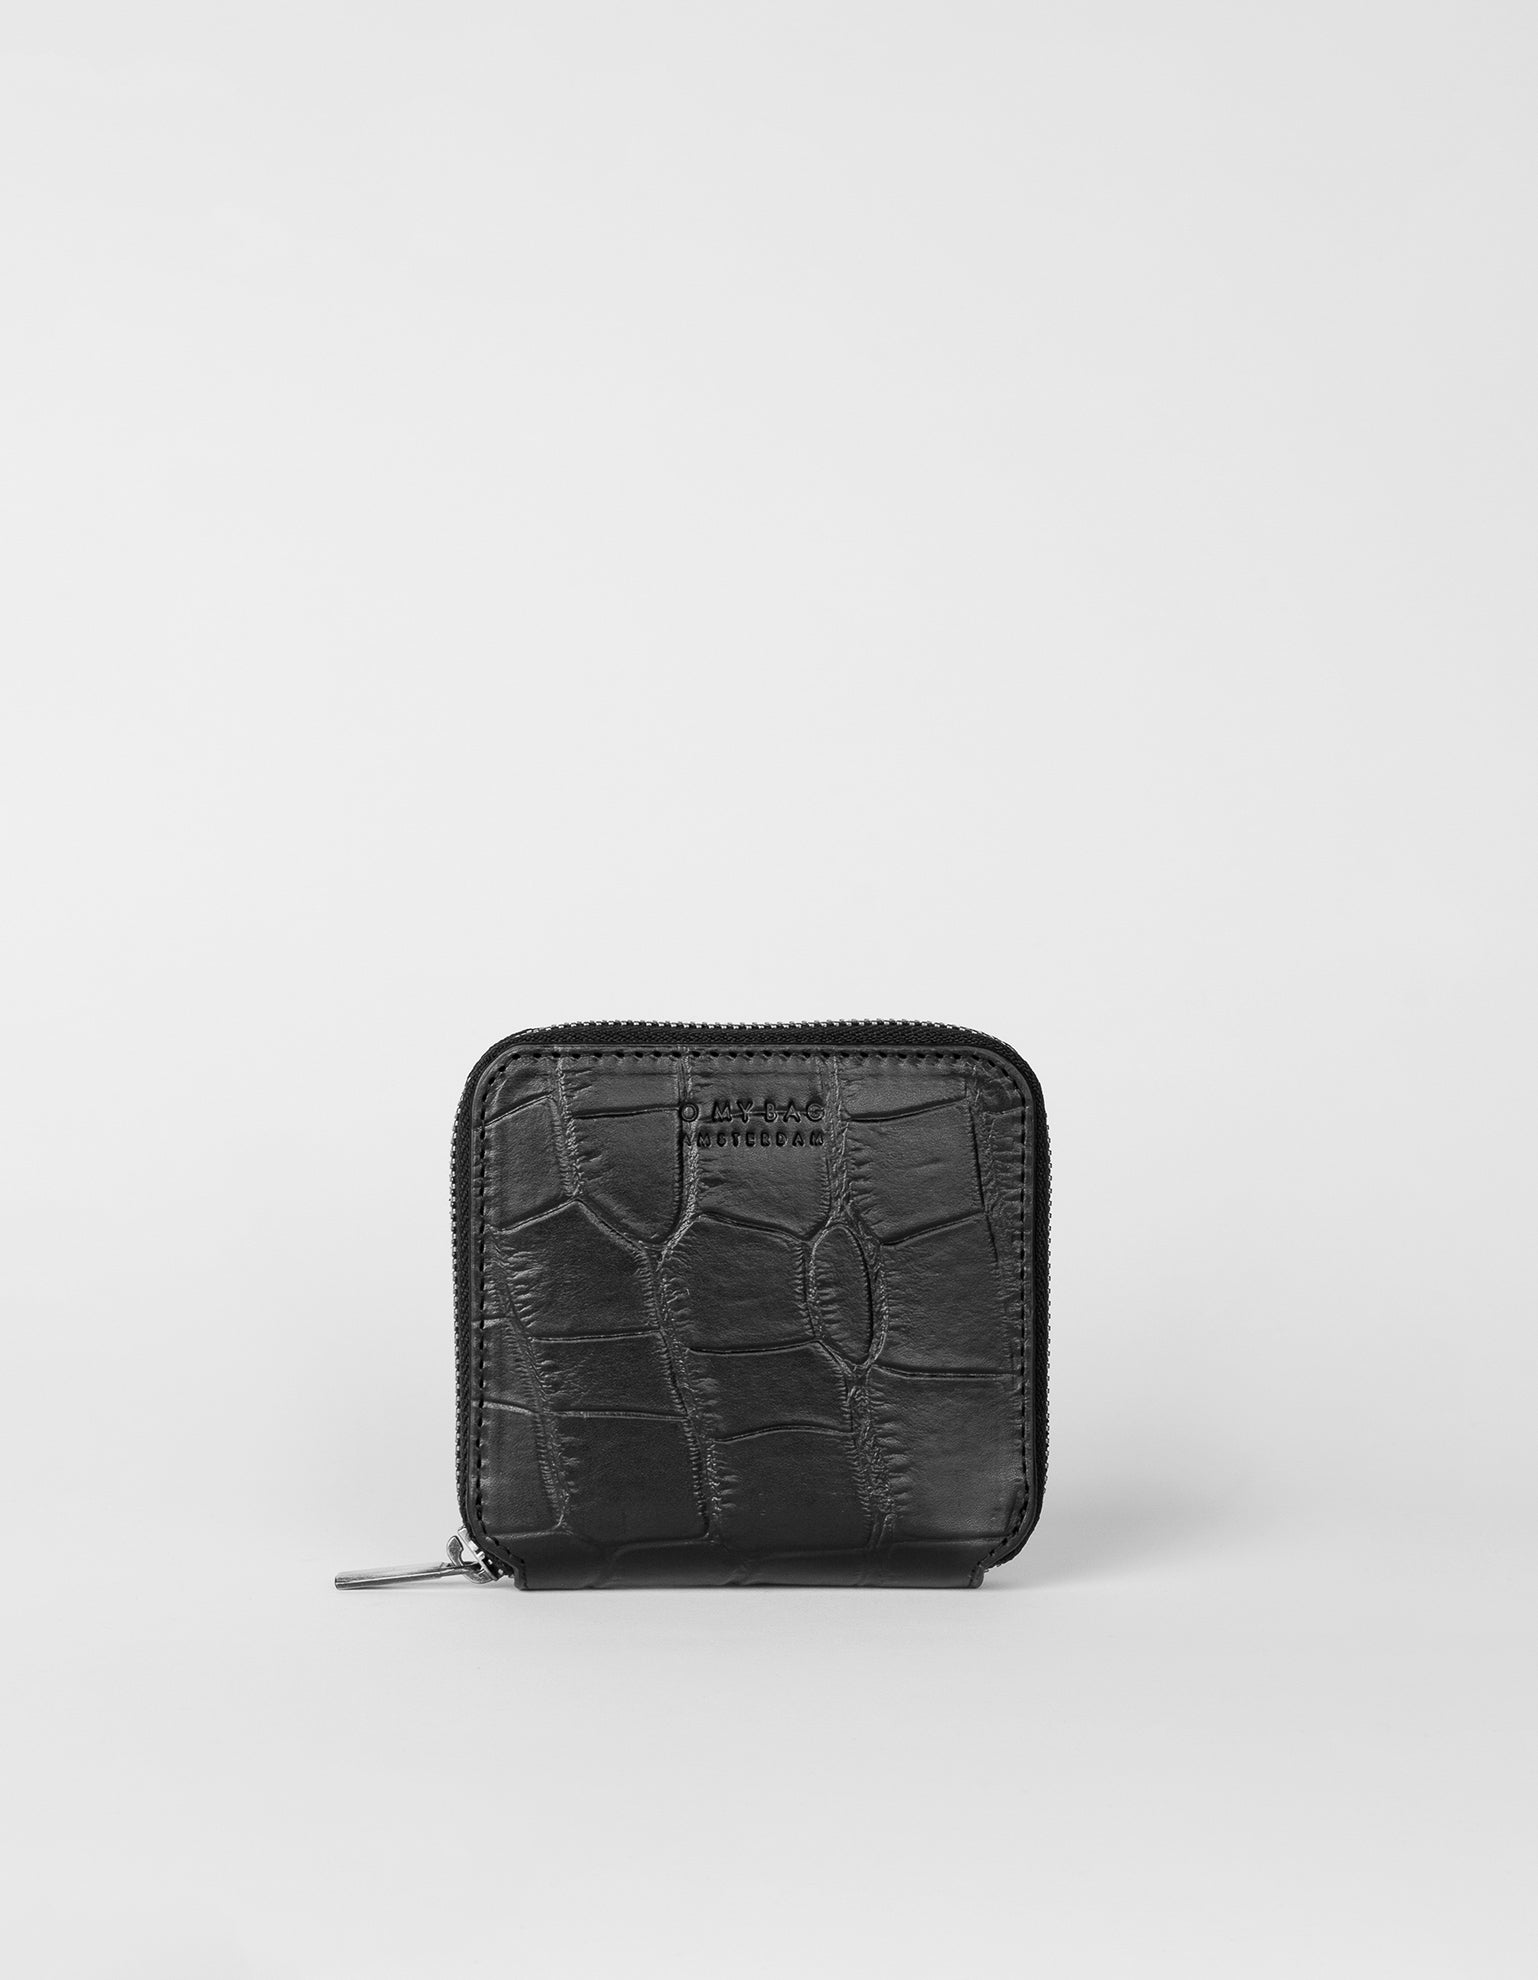 Sonny Square Wallet Black Classic Croco Leather. Front image